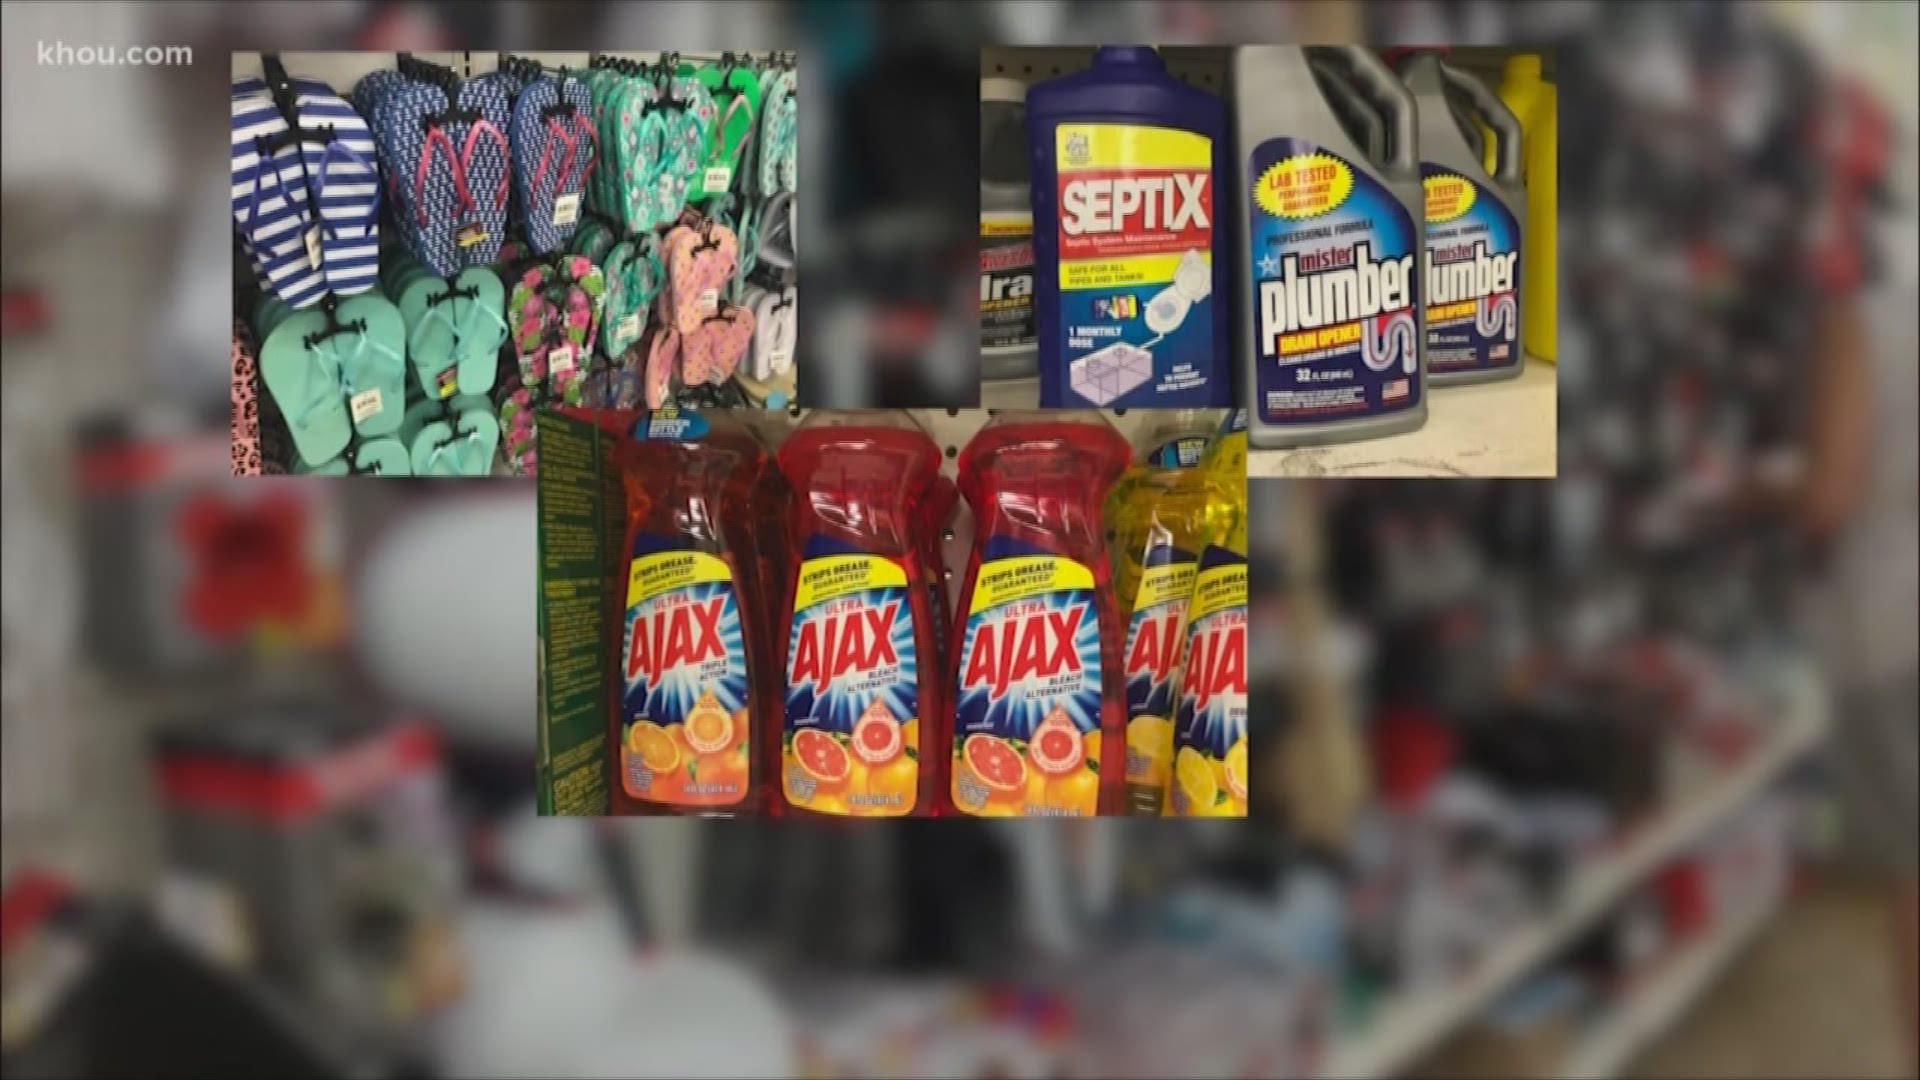 Dollar Stores used to sell everything for just a dollar but not anymore. Even Dollar Tree is experimenting with higher priced items. Consumer reporter John Matarese puts the big Dollar Stores to the test to see which has the best deals so you don't waste your money.